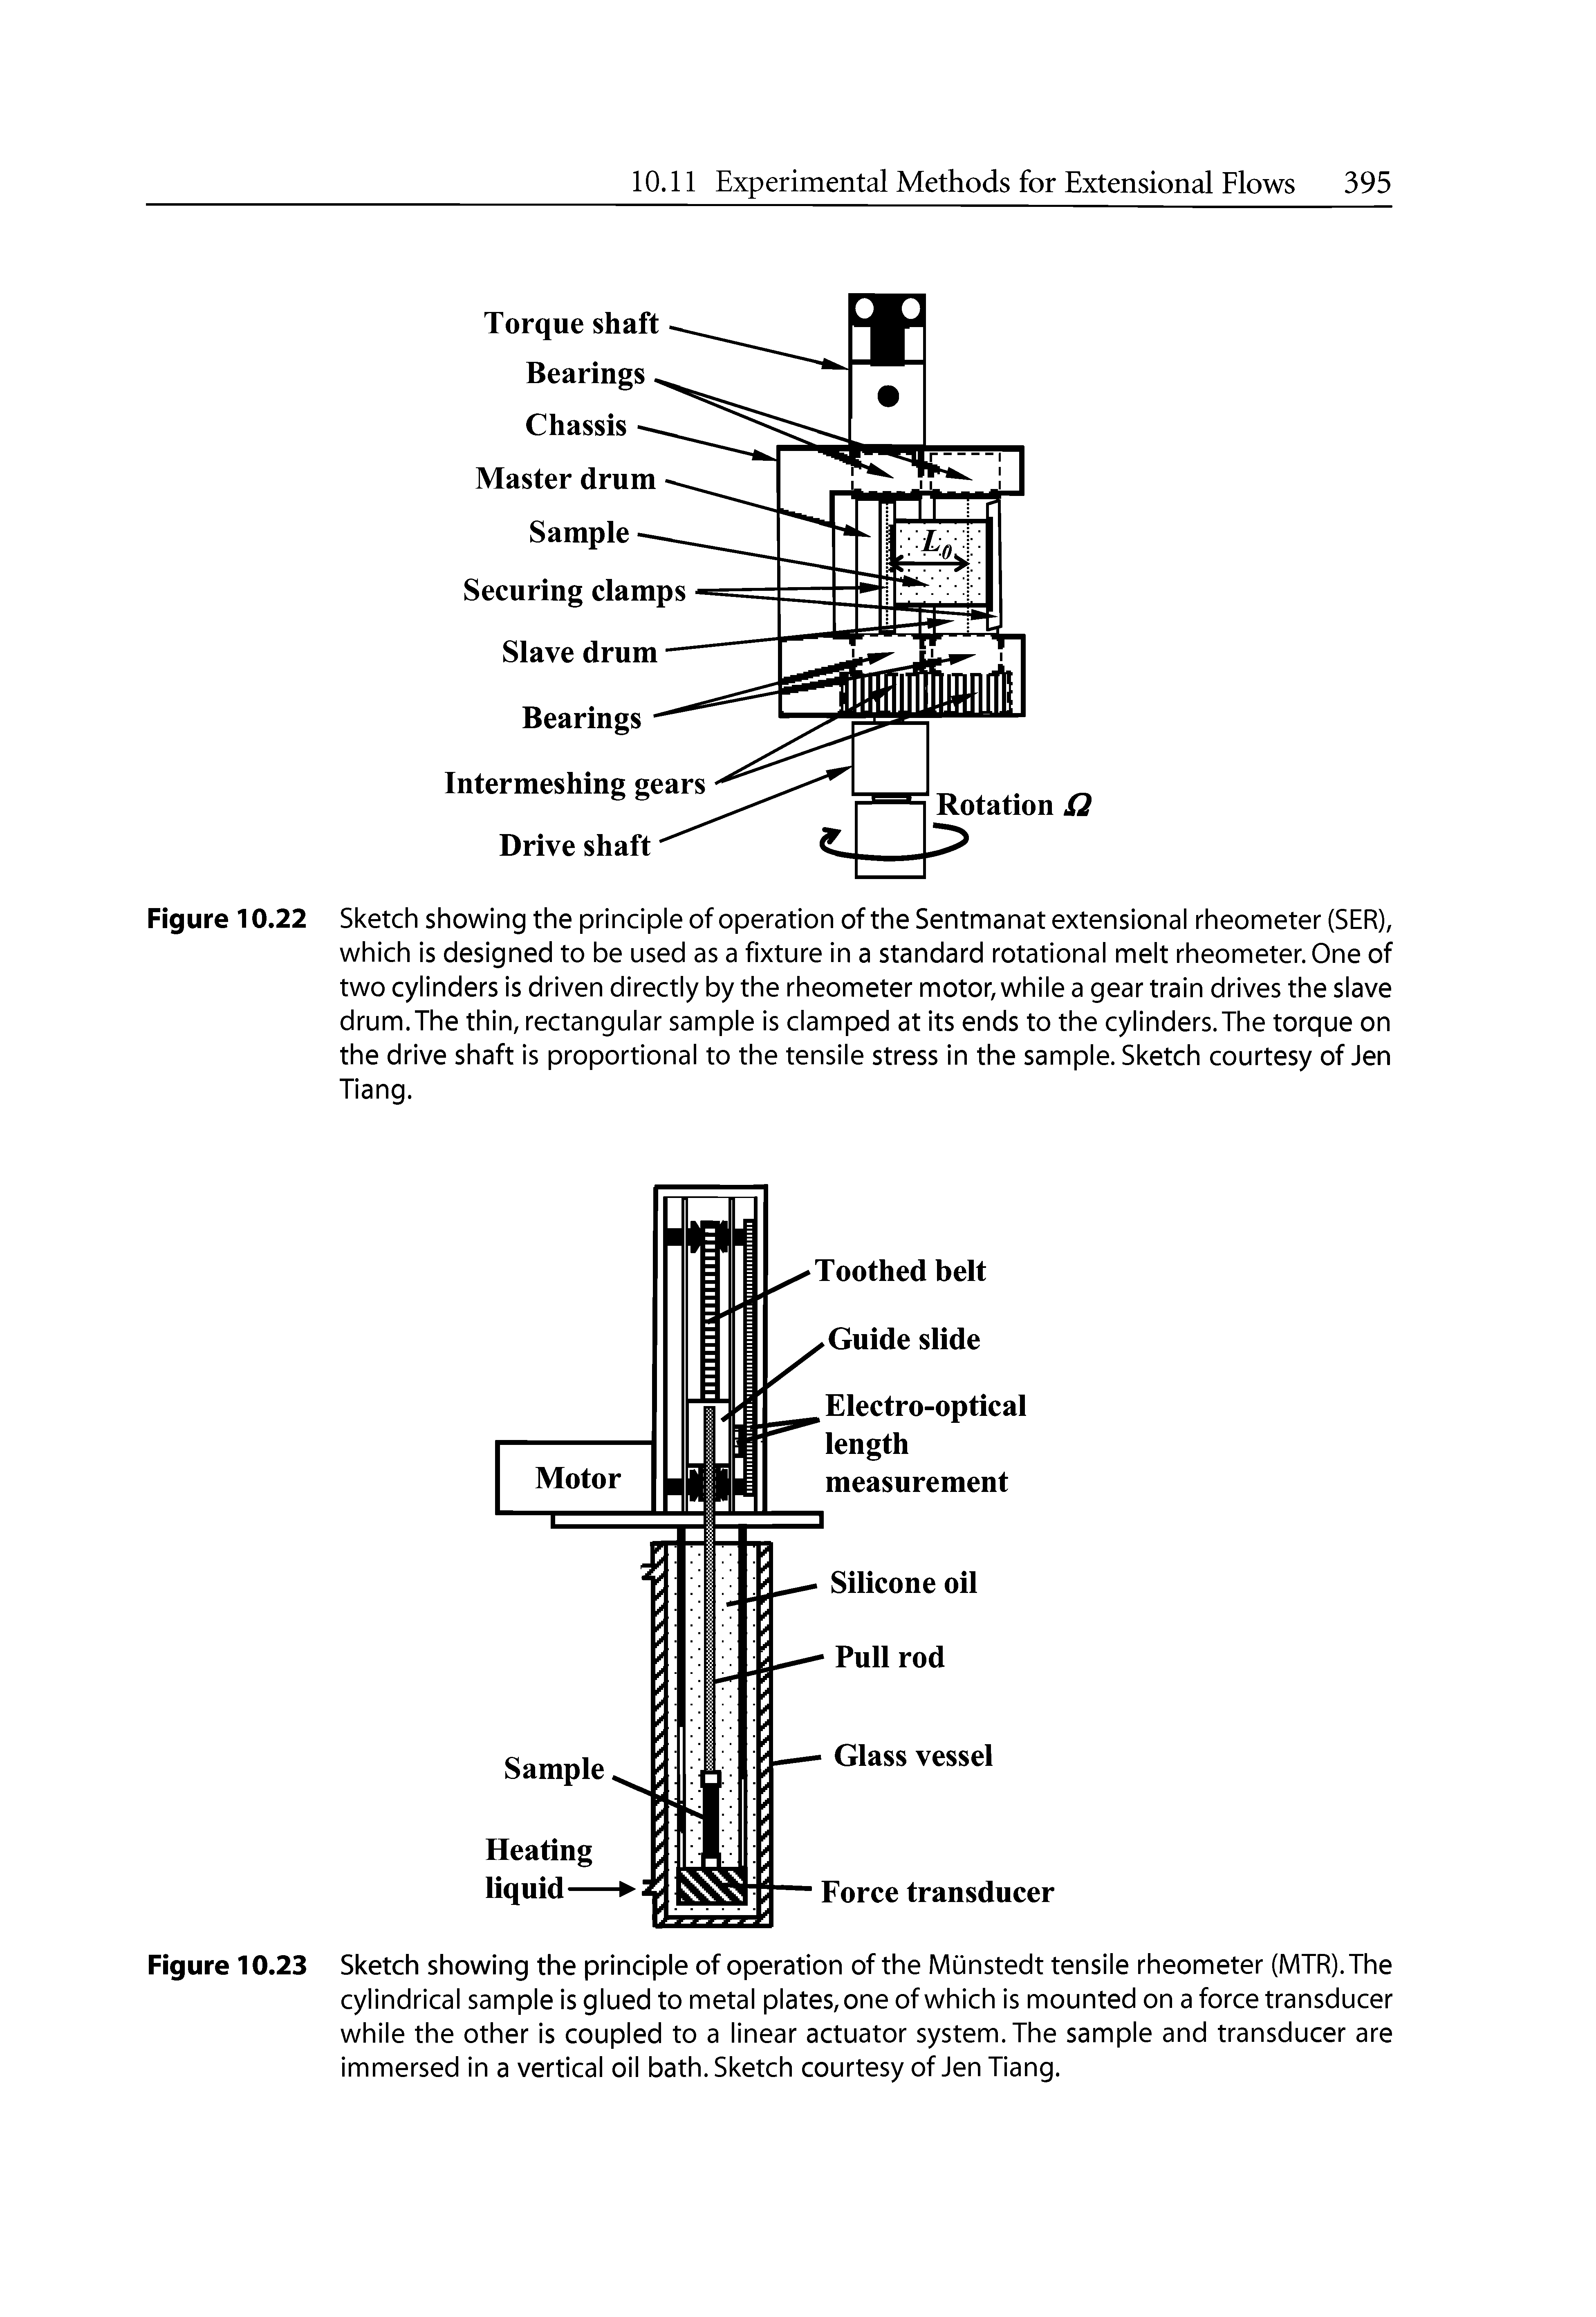 Figure 10.22 Sketch showing the principle of operation of the Sentmanat extensional rheometer (SER), which is designed to be used as a fixture in a standard rotational melt rheometer. One of two cylinders is driven directly by the rheometer motor, while a gear train drives the slave drum.The thin, rectangular sample is clamped at its ends to the cylinders.The torque on the drive shaft is proportional to the tensile stress in the sample. Sketch courtesy of Jen Tiang.